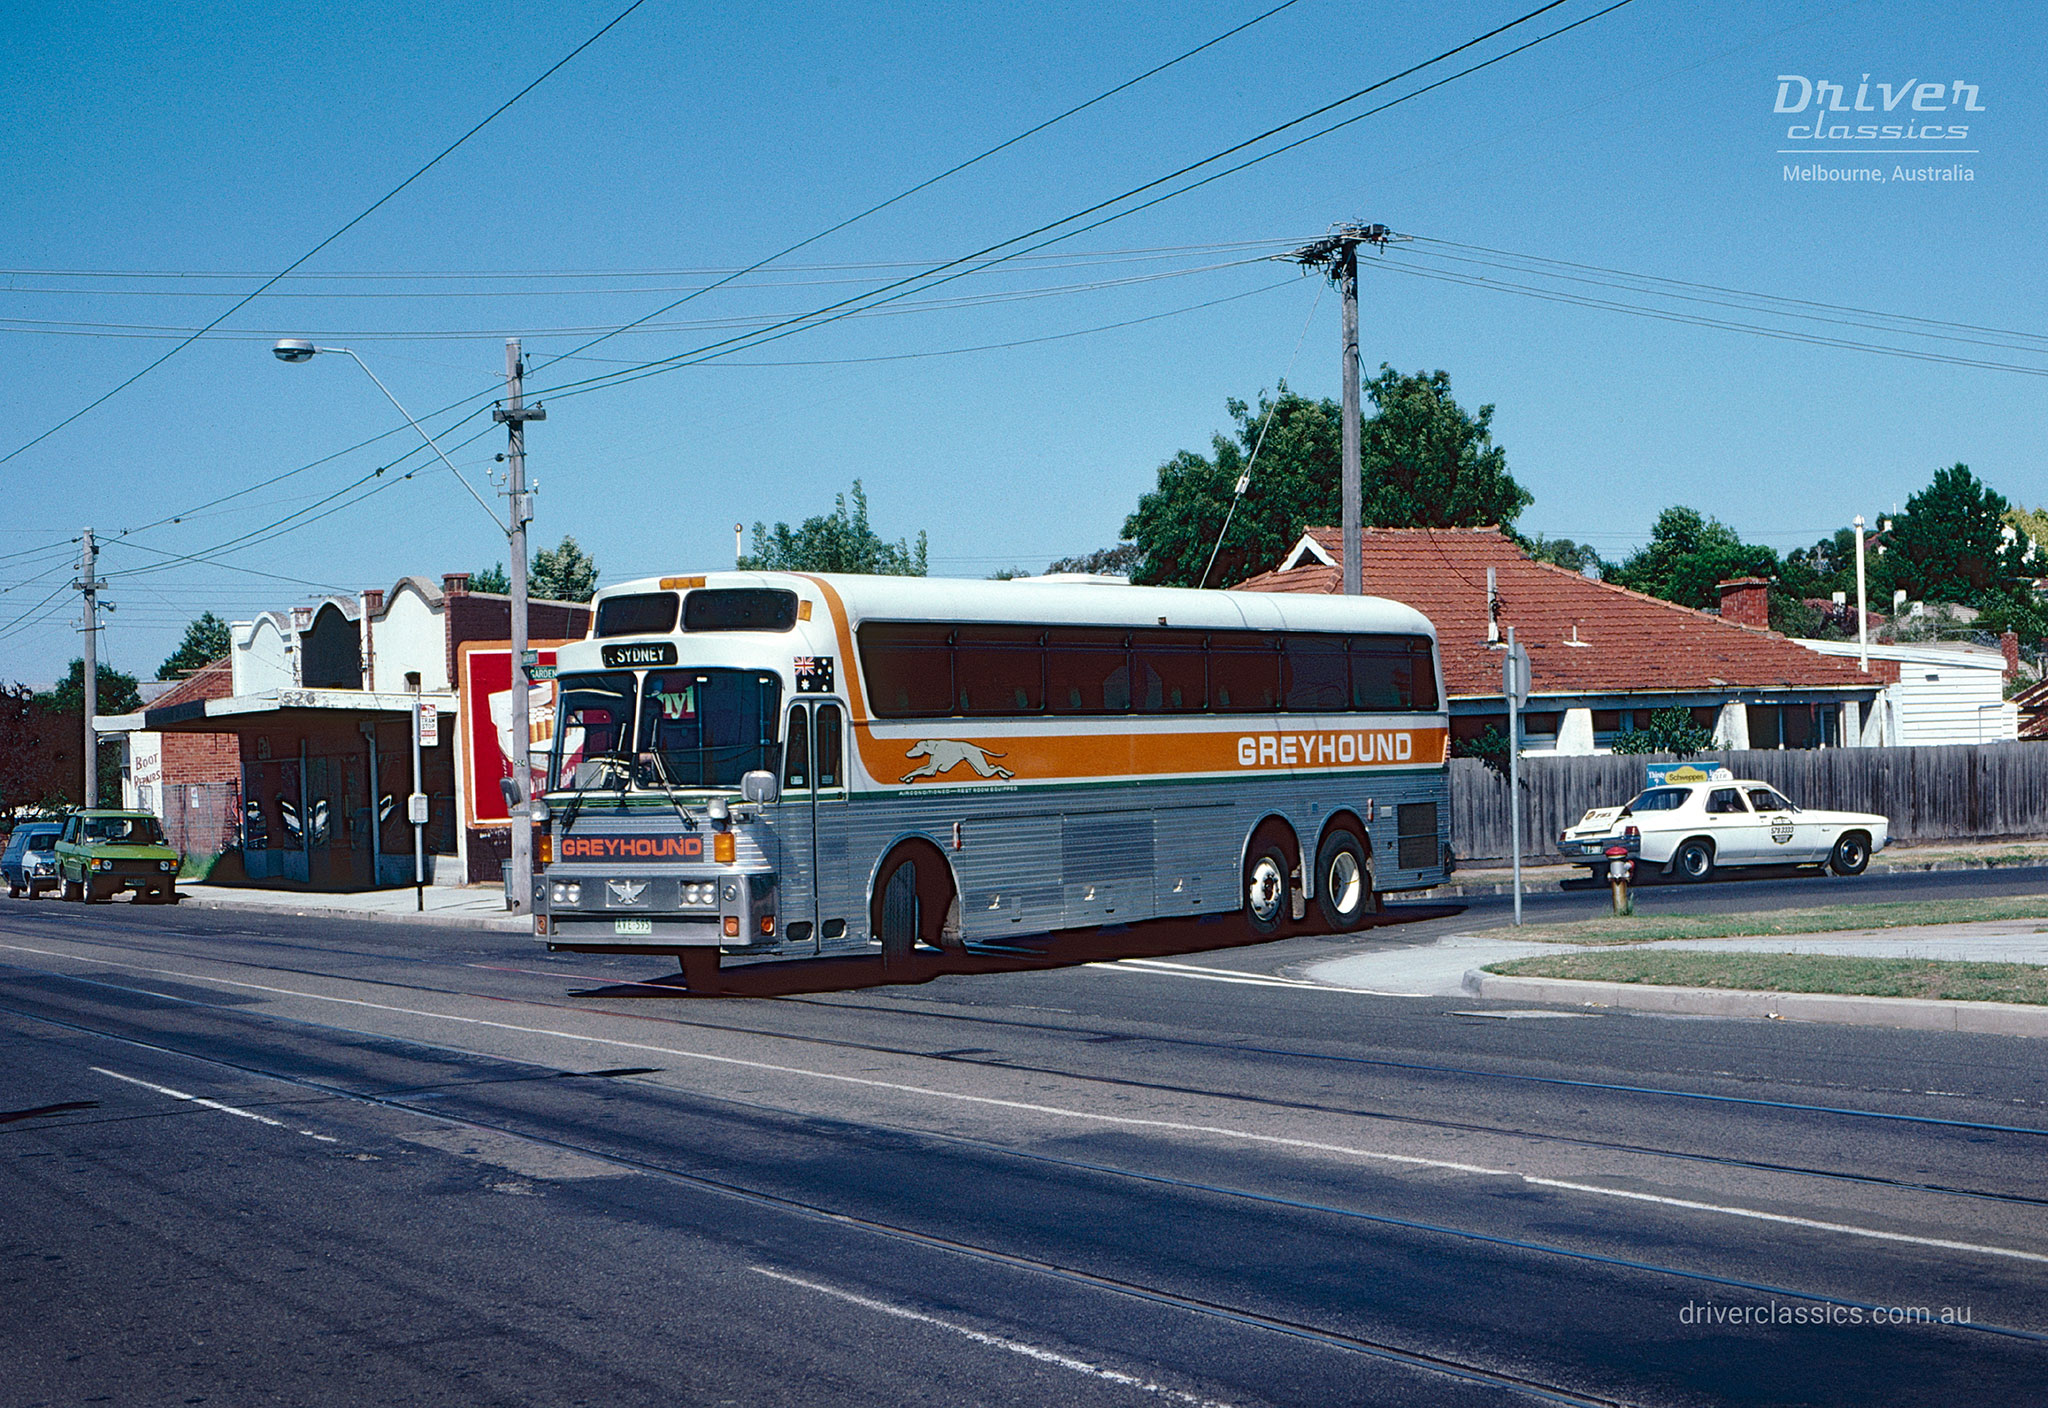 Greyhound 1976 Silver Eagle Model 05 bus, driving on road, Caulfield South VIC, Photo taken April 1981.